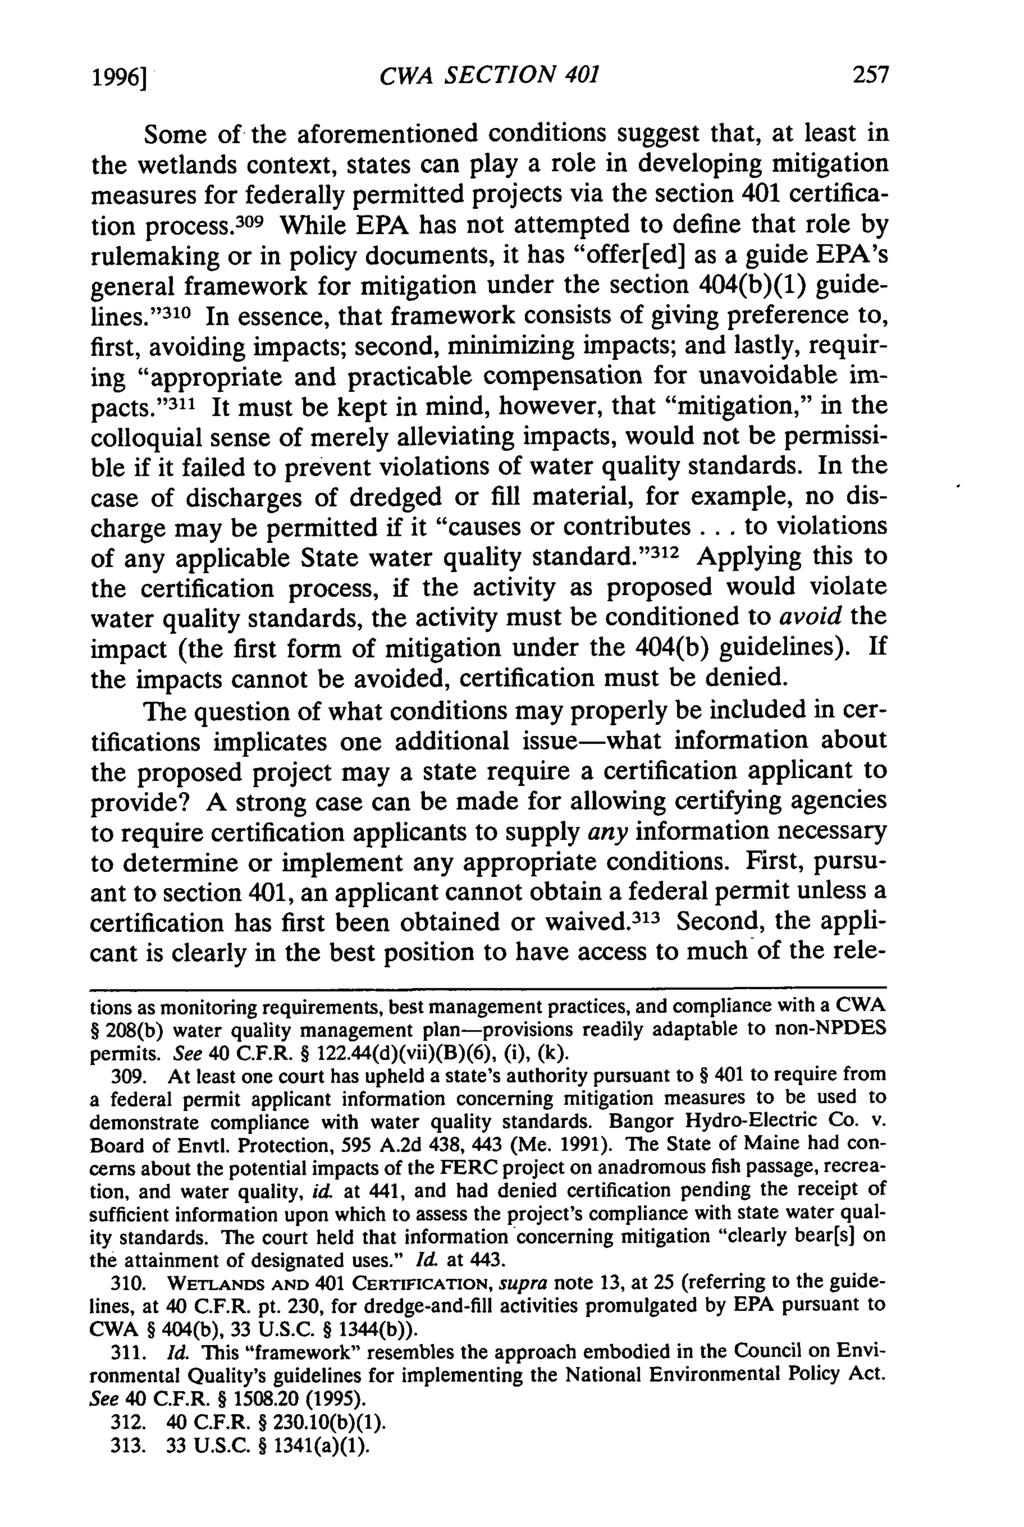 1996] CWA SECTION 401 Some of the aforementioned conditions suggest that, at least in the wetlands context, states can play a role in developing mitigation measures for federally permitted projects